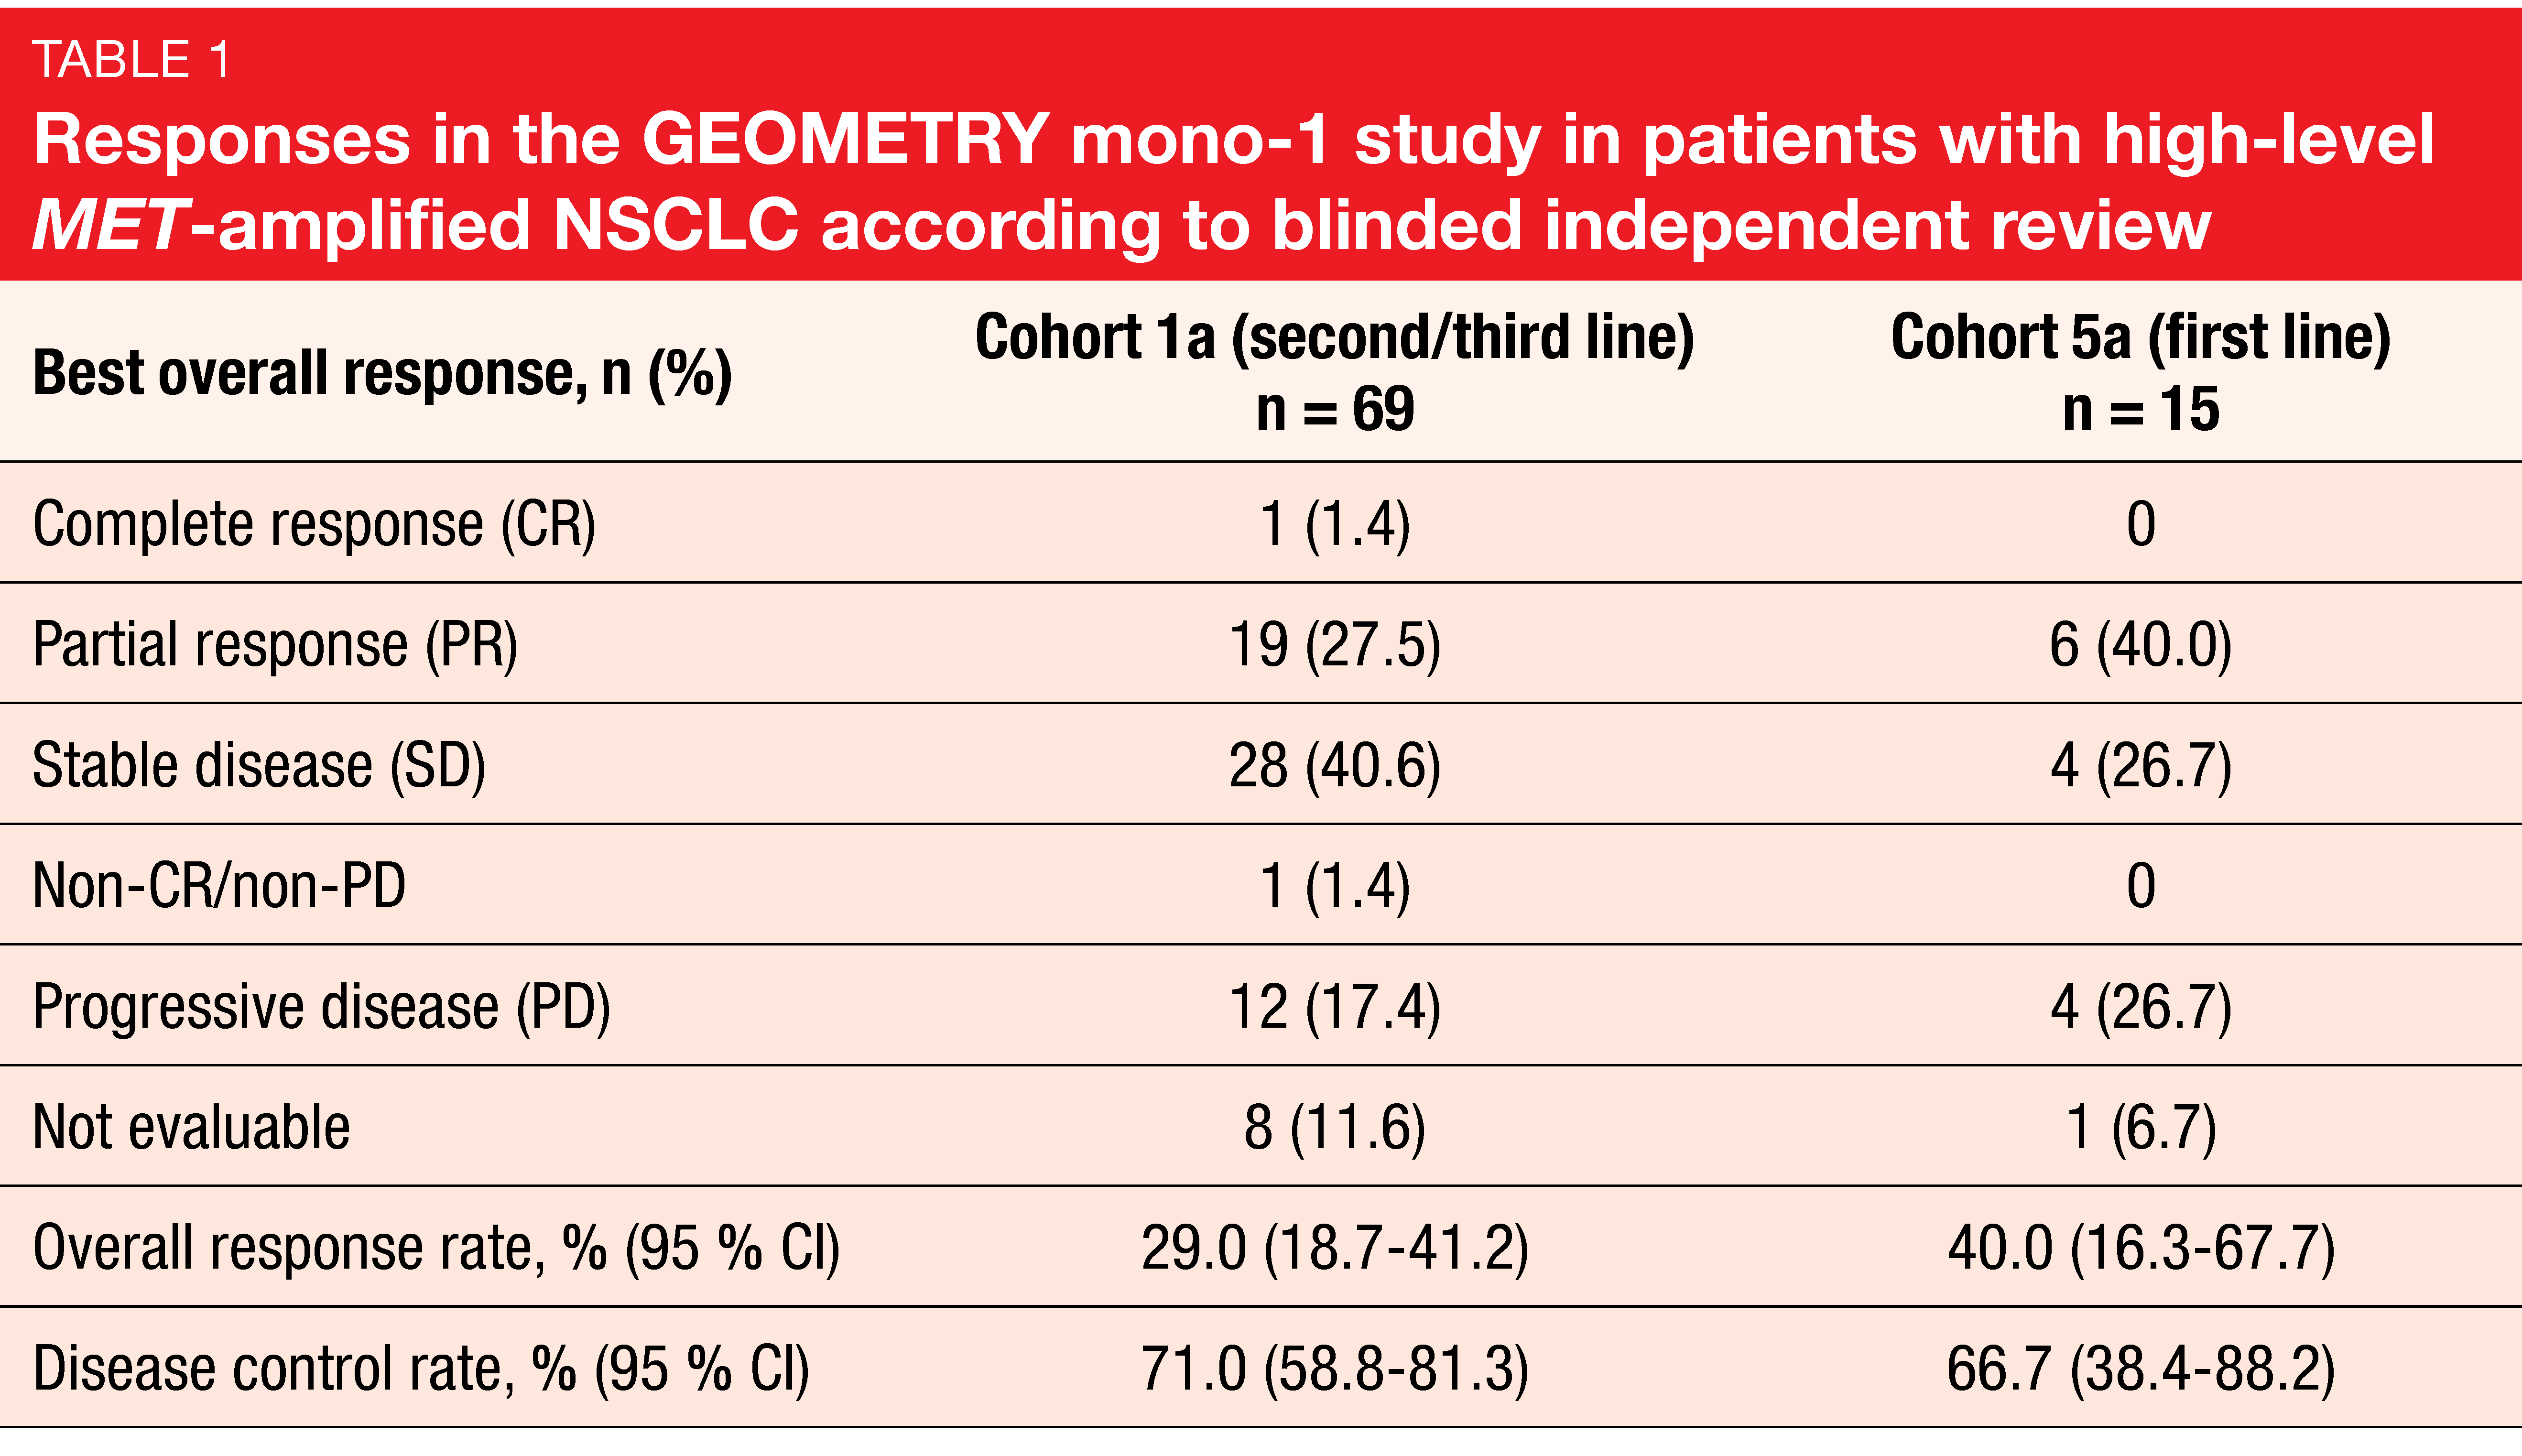 Table 1: Responses in the GEOMETRY mono-1 study in patients with high-level MET-amplified NSCLC according to blinded independent review